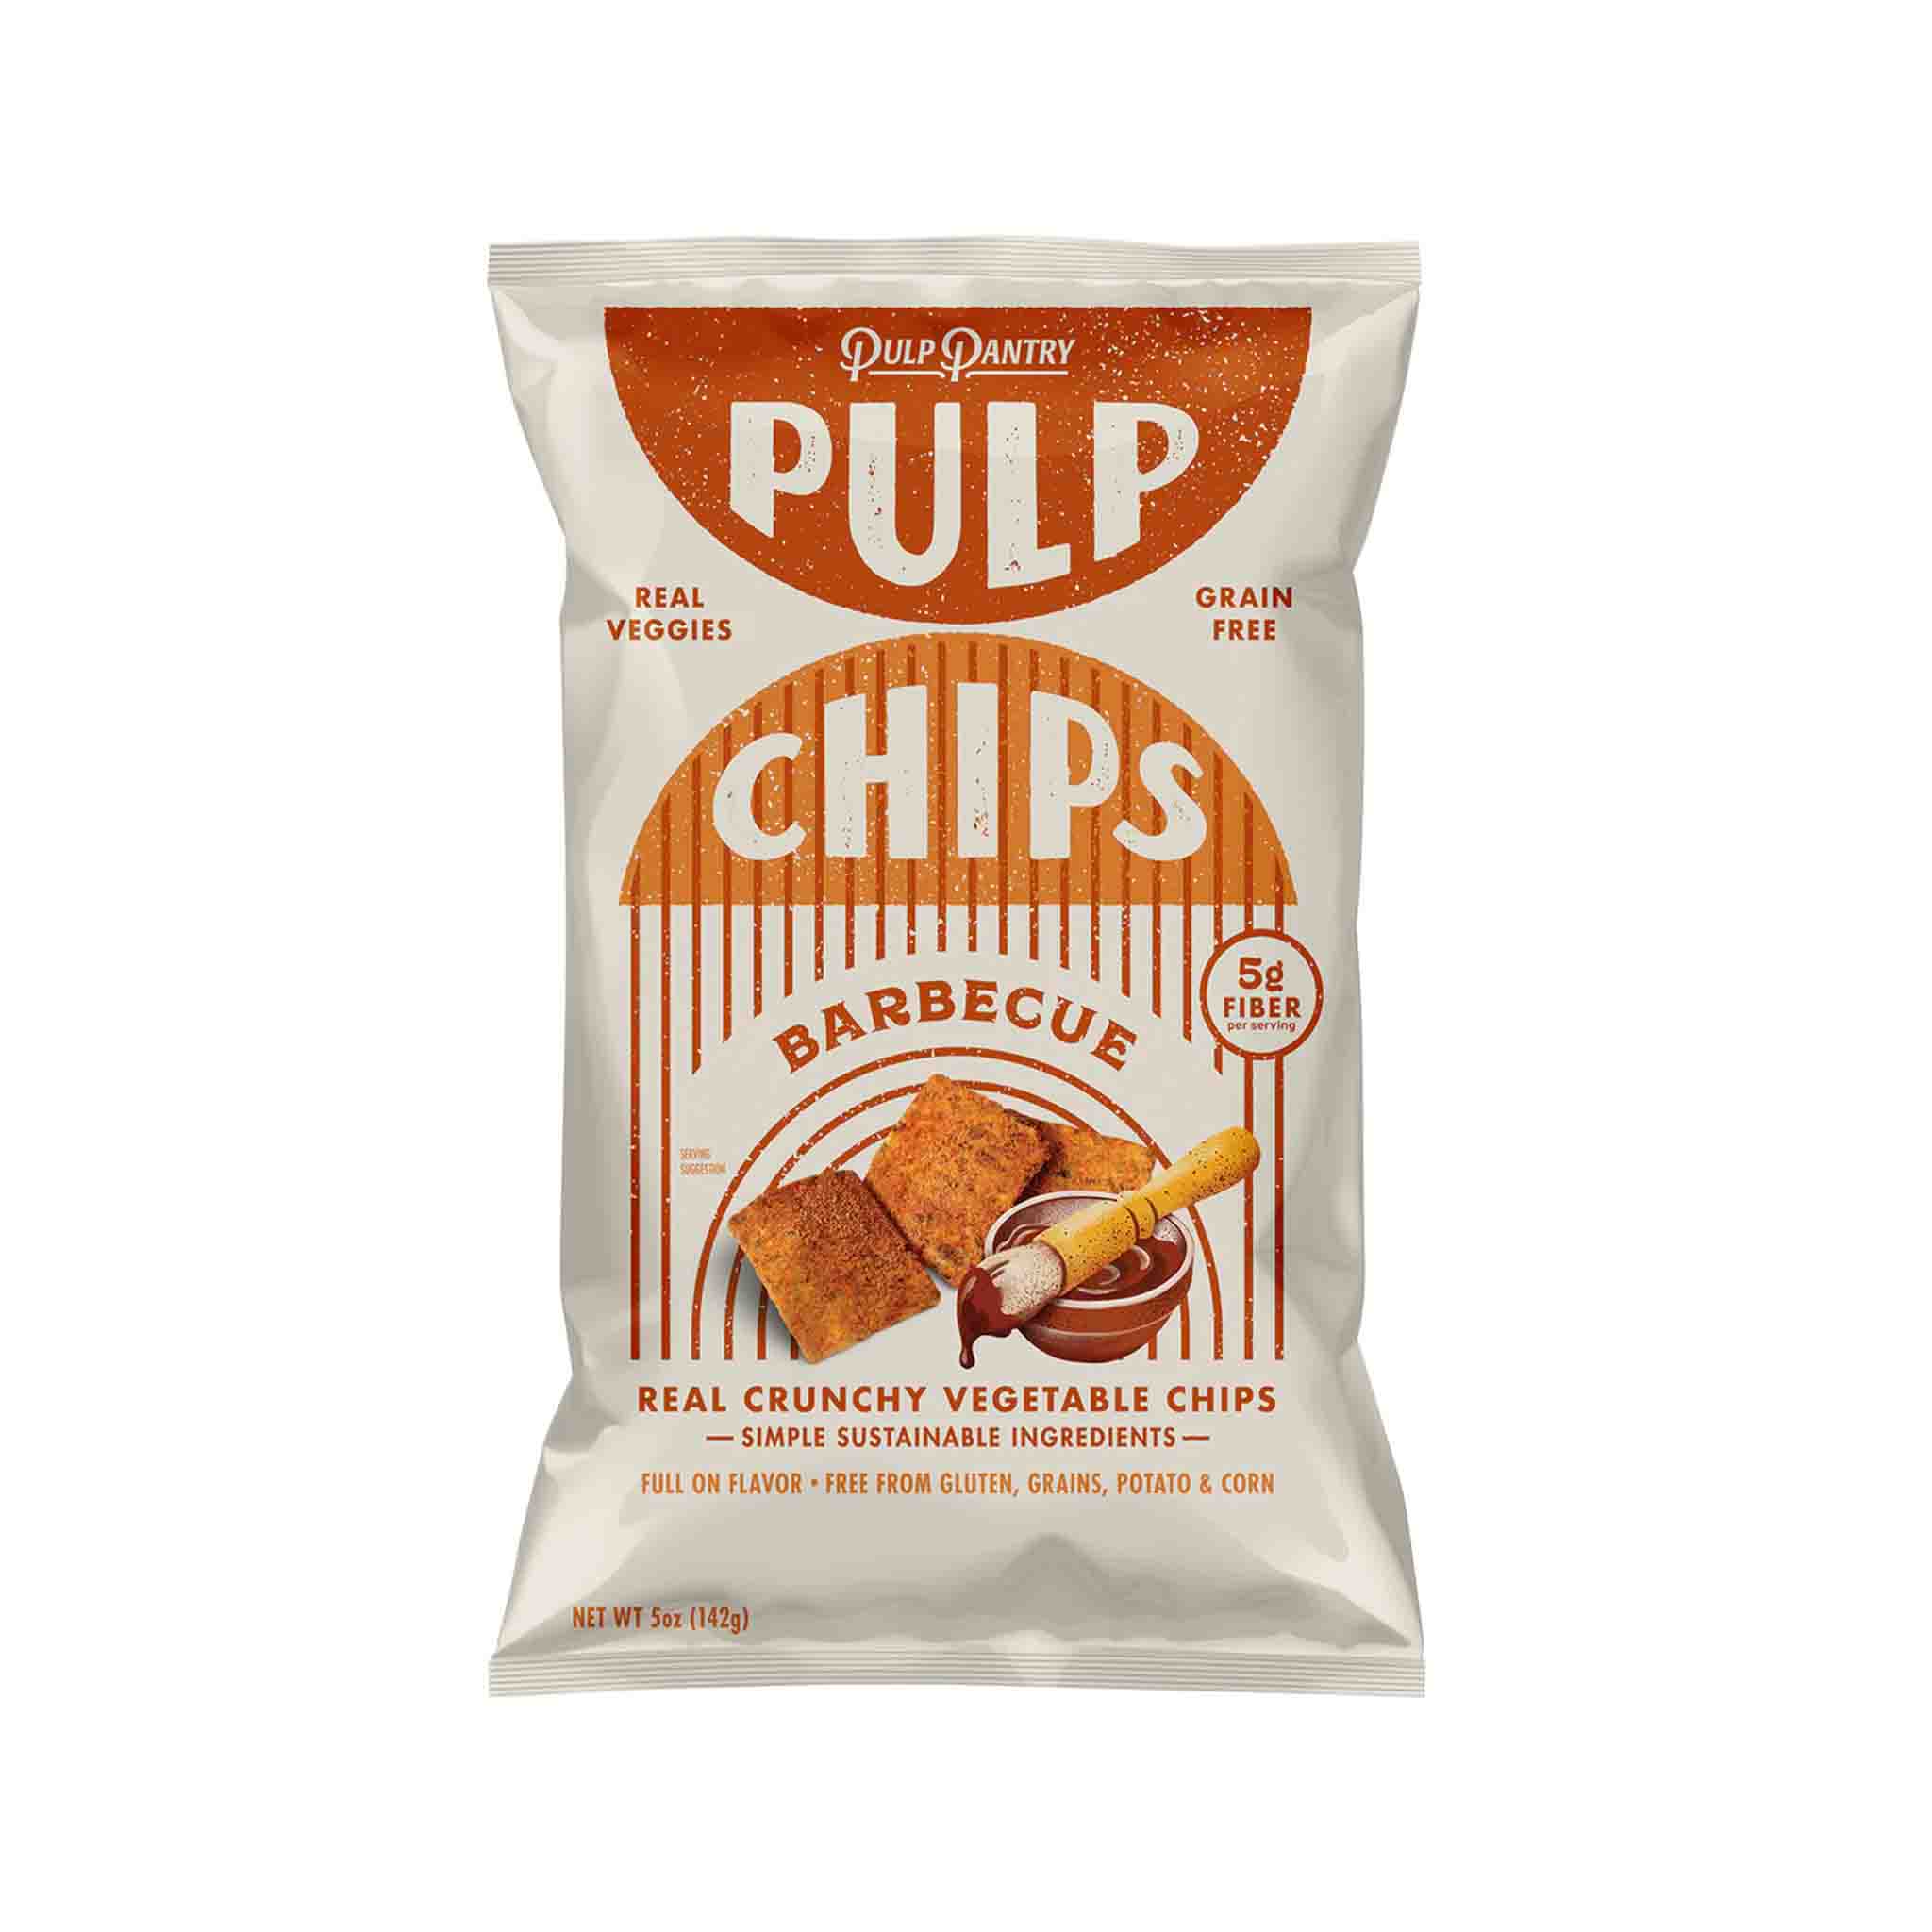 PULP PANTRY BARBECUE CHIPS 5oz